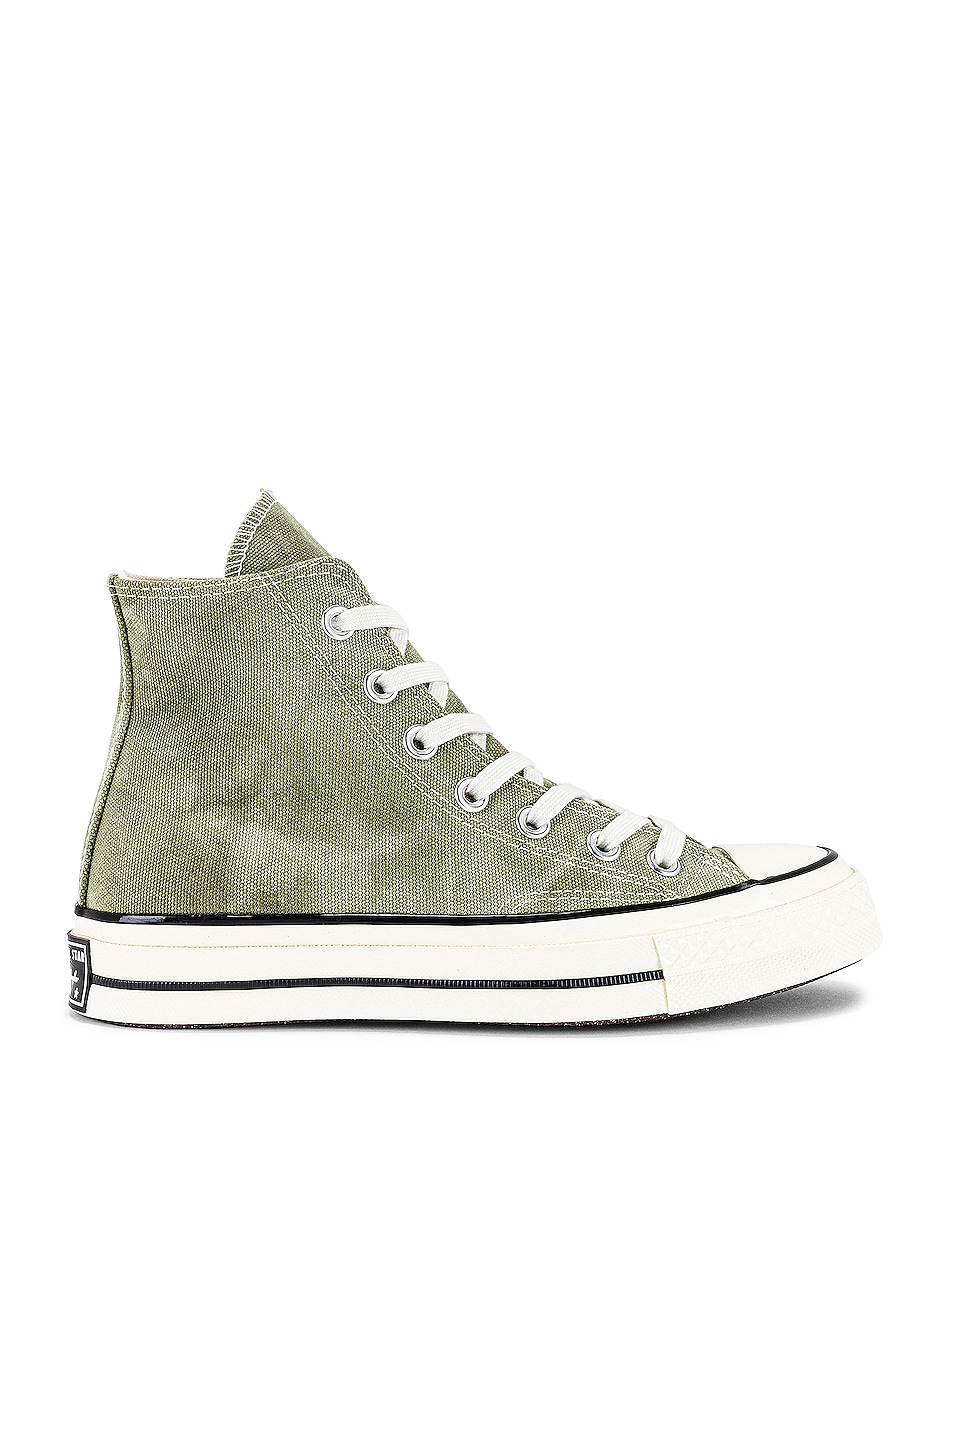 Image 1 of Converse Chuck 70 Hi Washed Canvas in Light Field Surplus